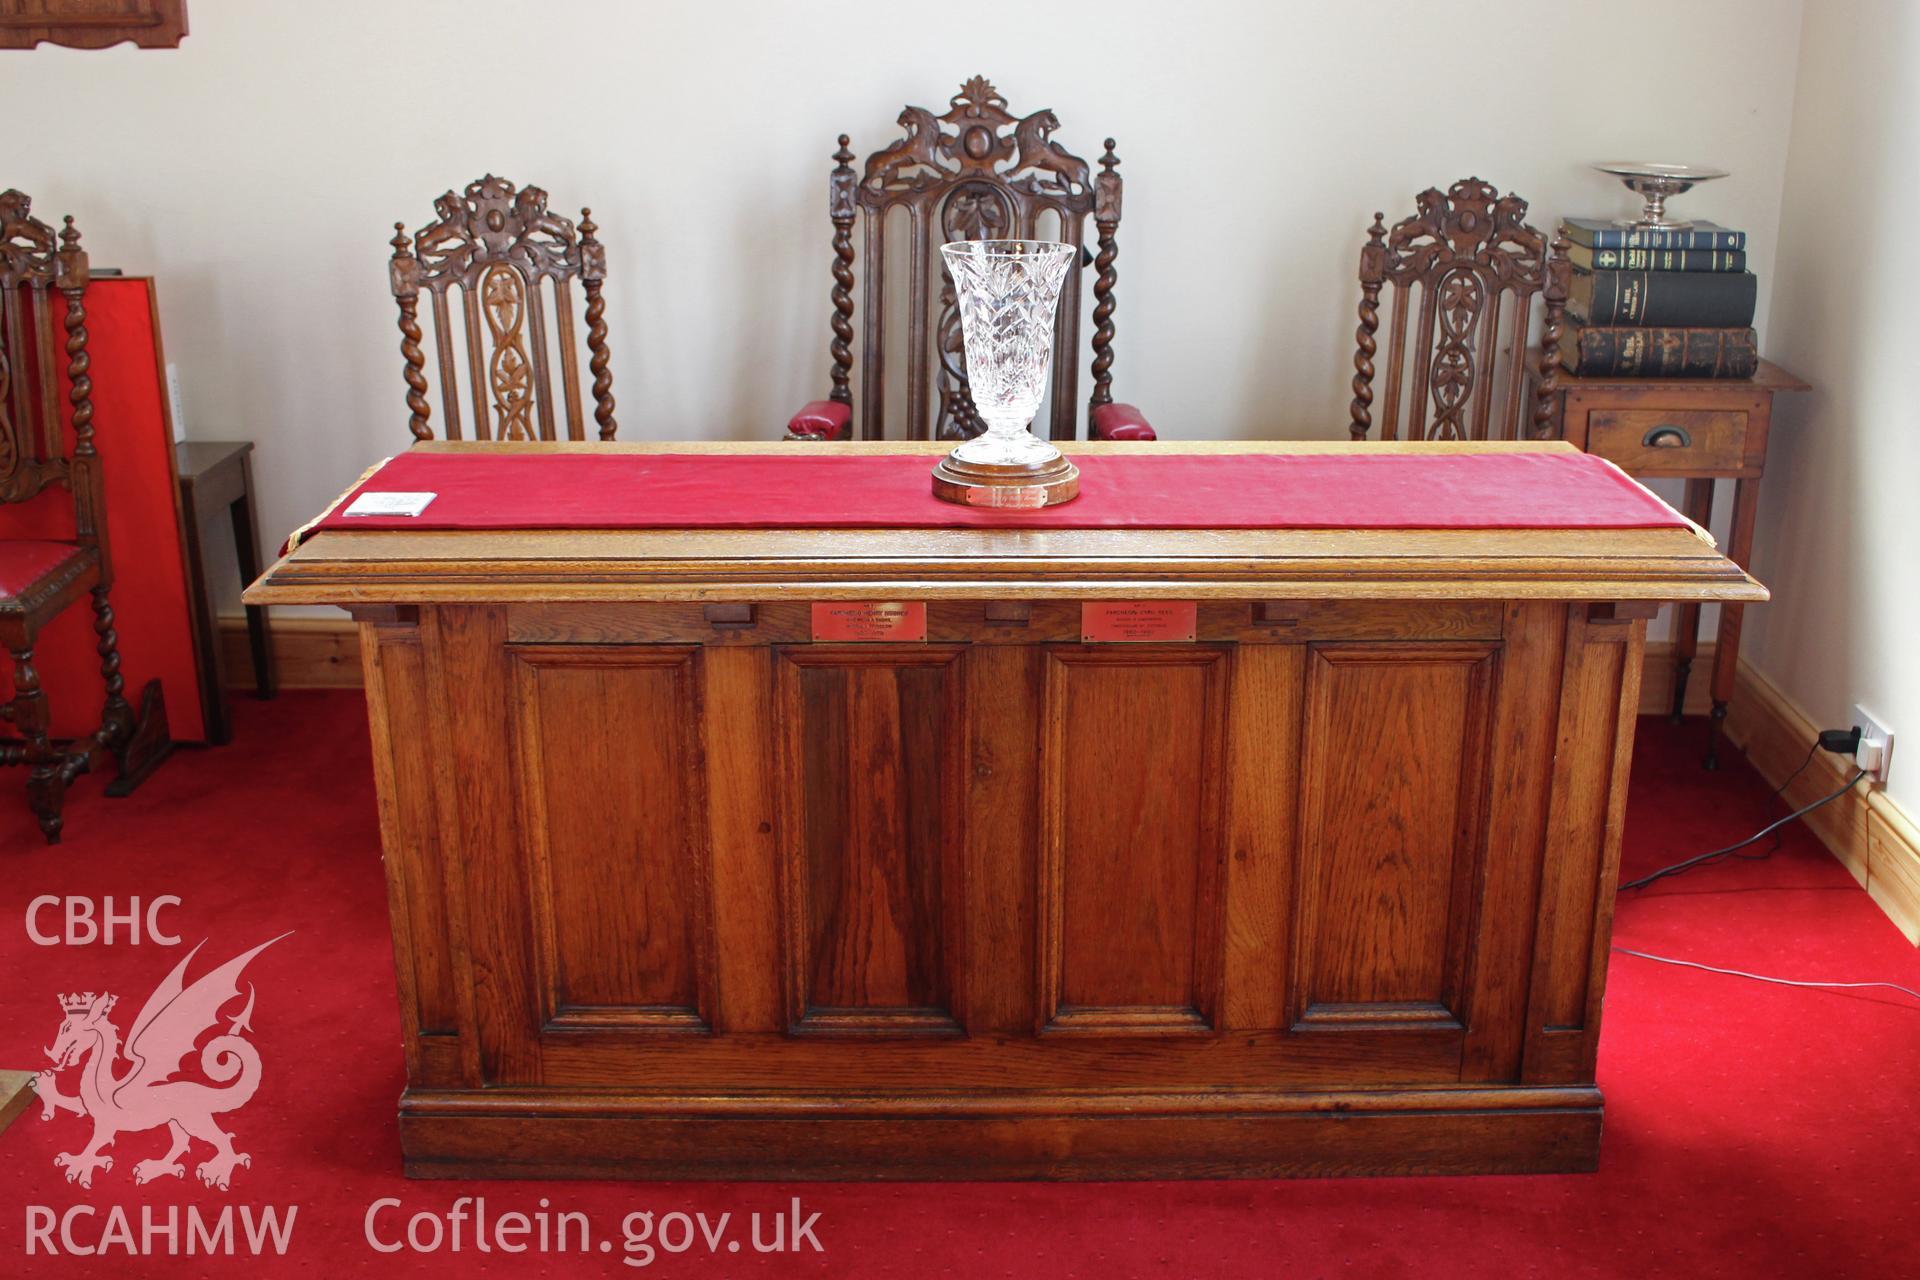 Bethel Independent Chapel, Pen-Clawdd, detail of communion table in vestry.